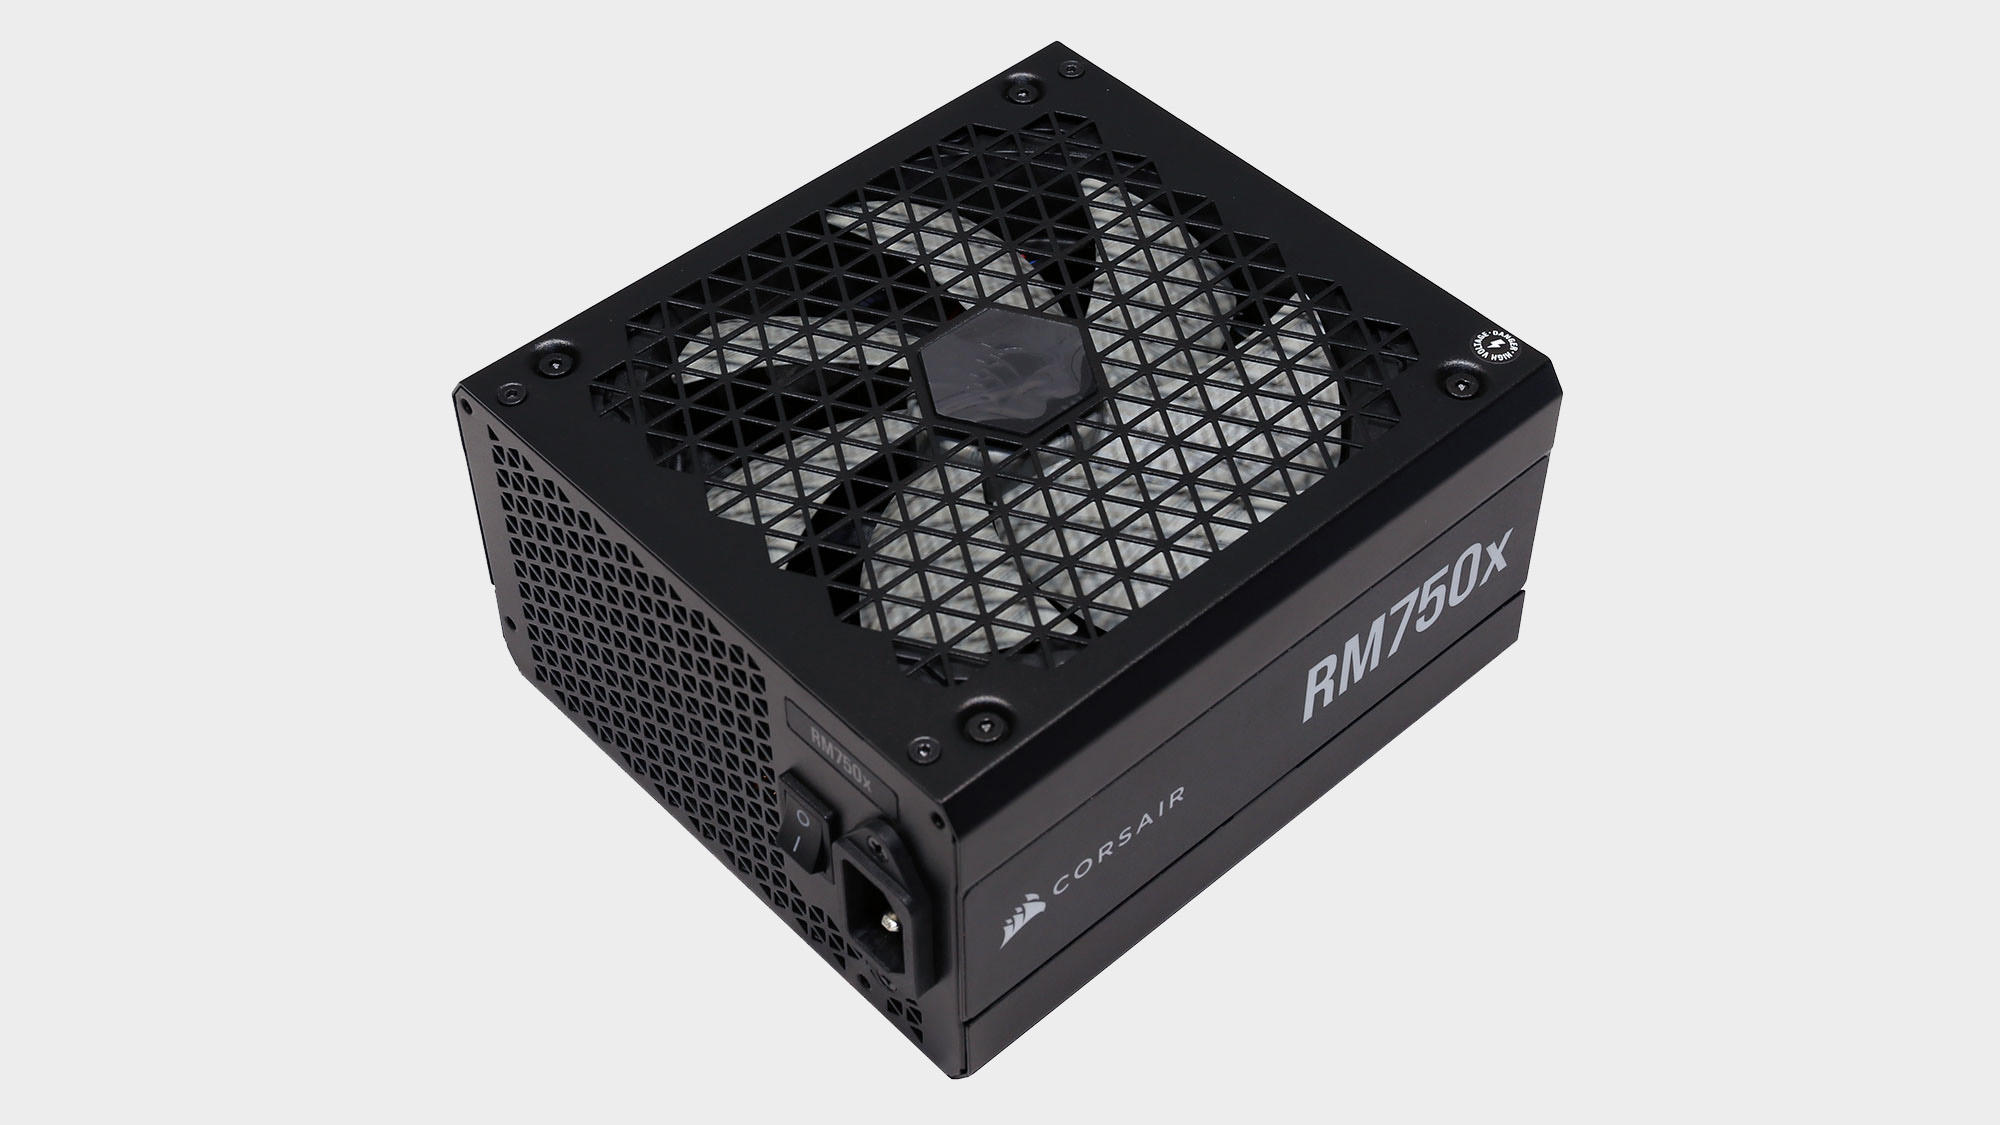 Corsair RM750x power supply pictured with and without box.